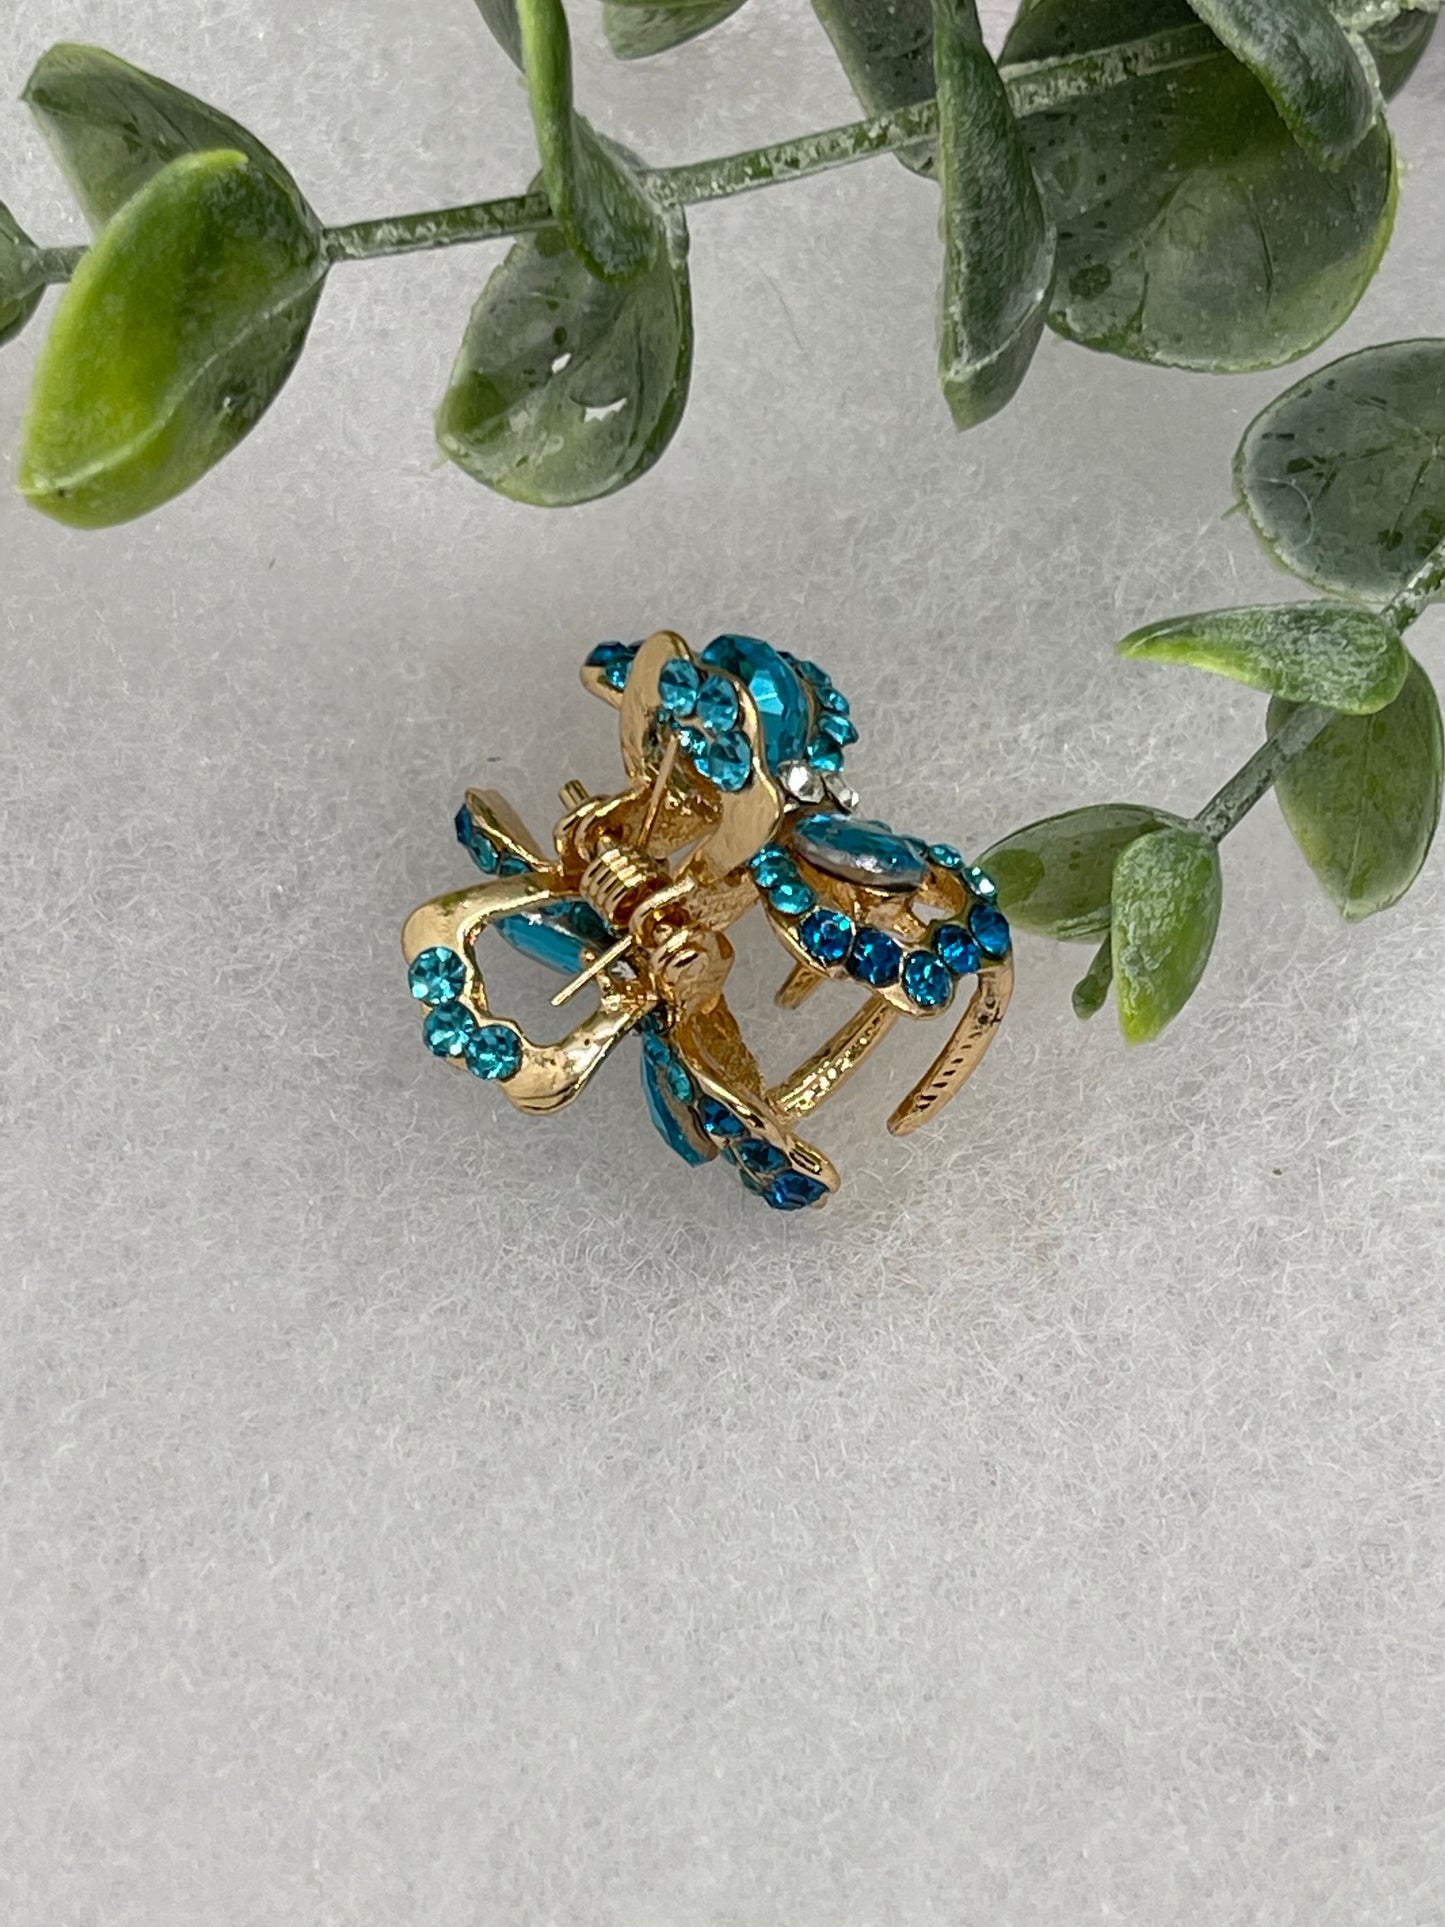 Teal blue crystal rhinestone approximately 1.0” gold tone hair claw wedding bridal shower engagement formal princess accessory accessories